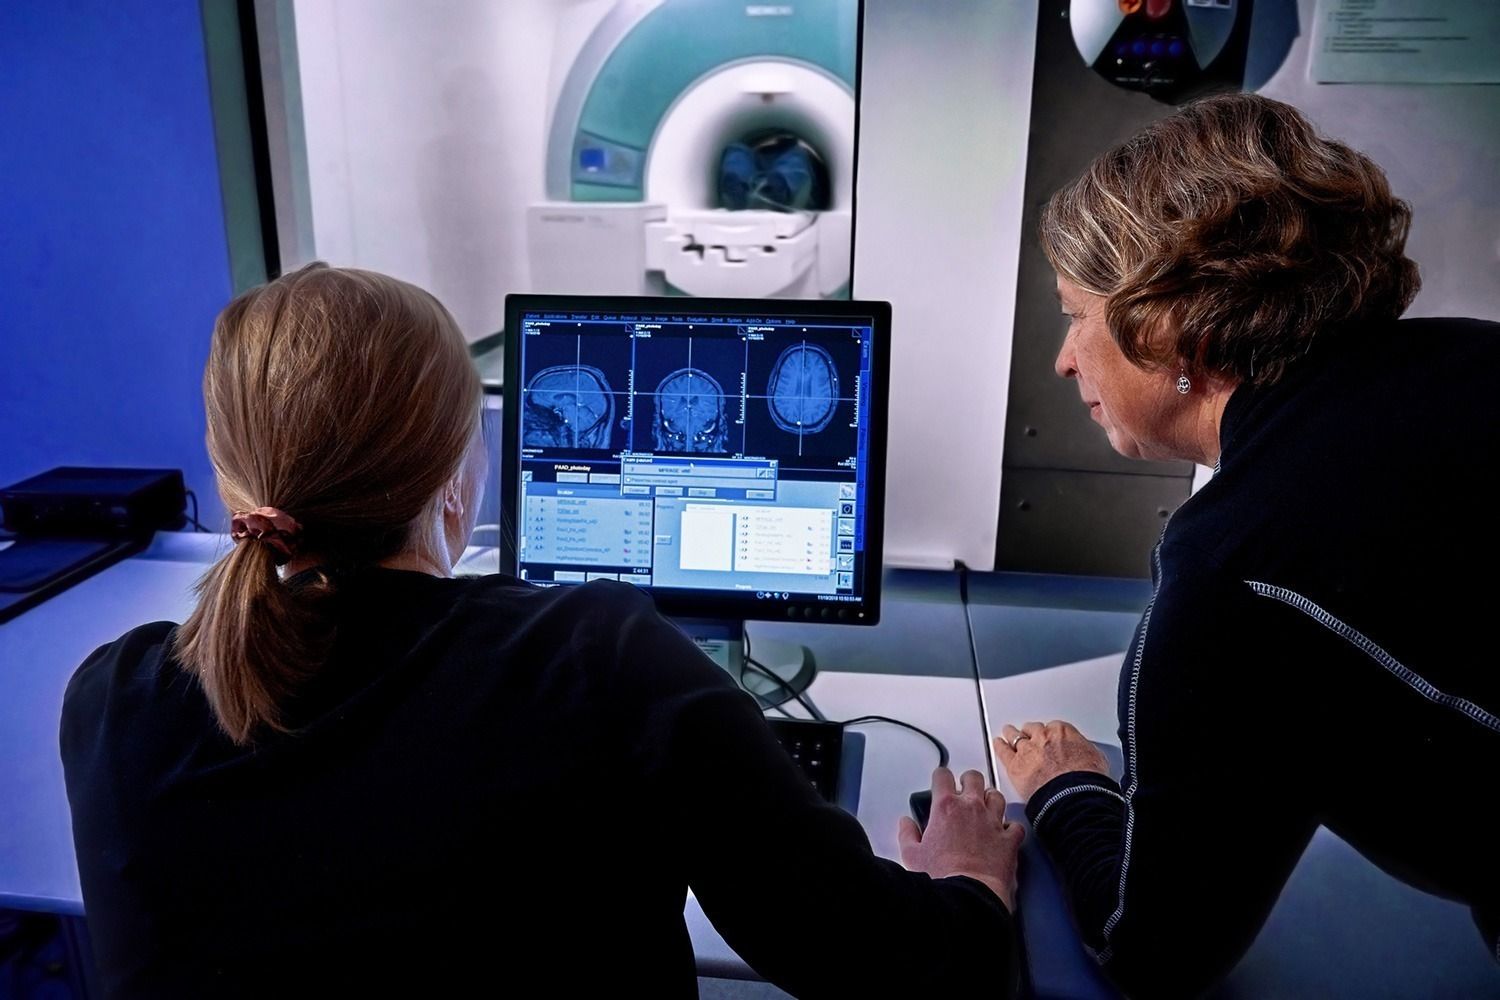 Dr. Etnier and a graduate student look at MRI scan results on a computer.